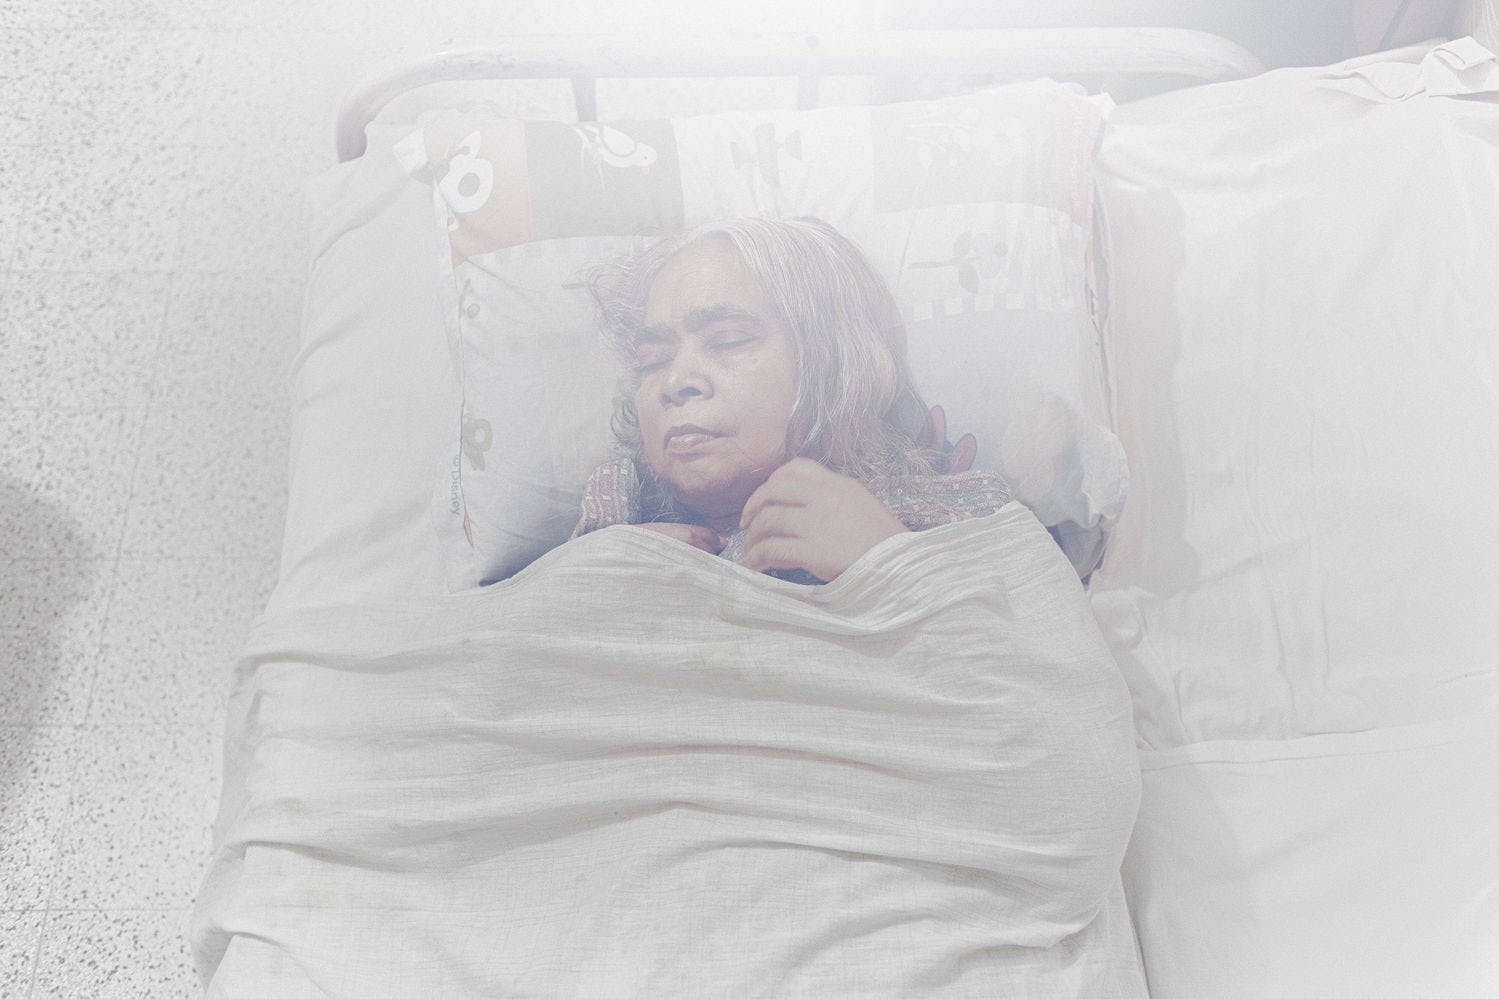 woman sleeping in white bed